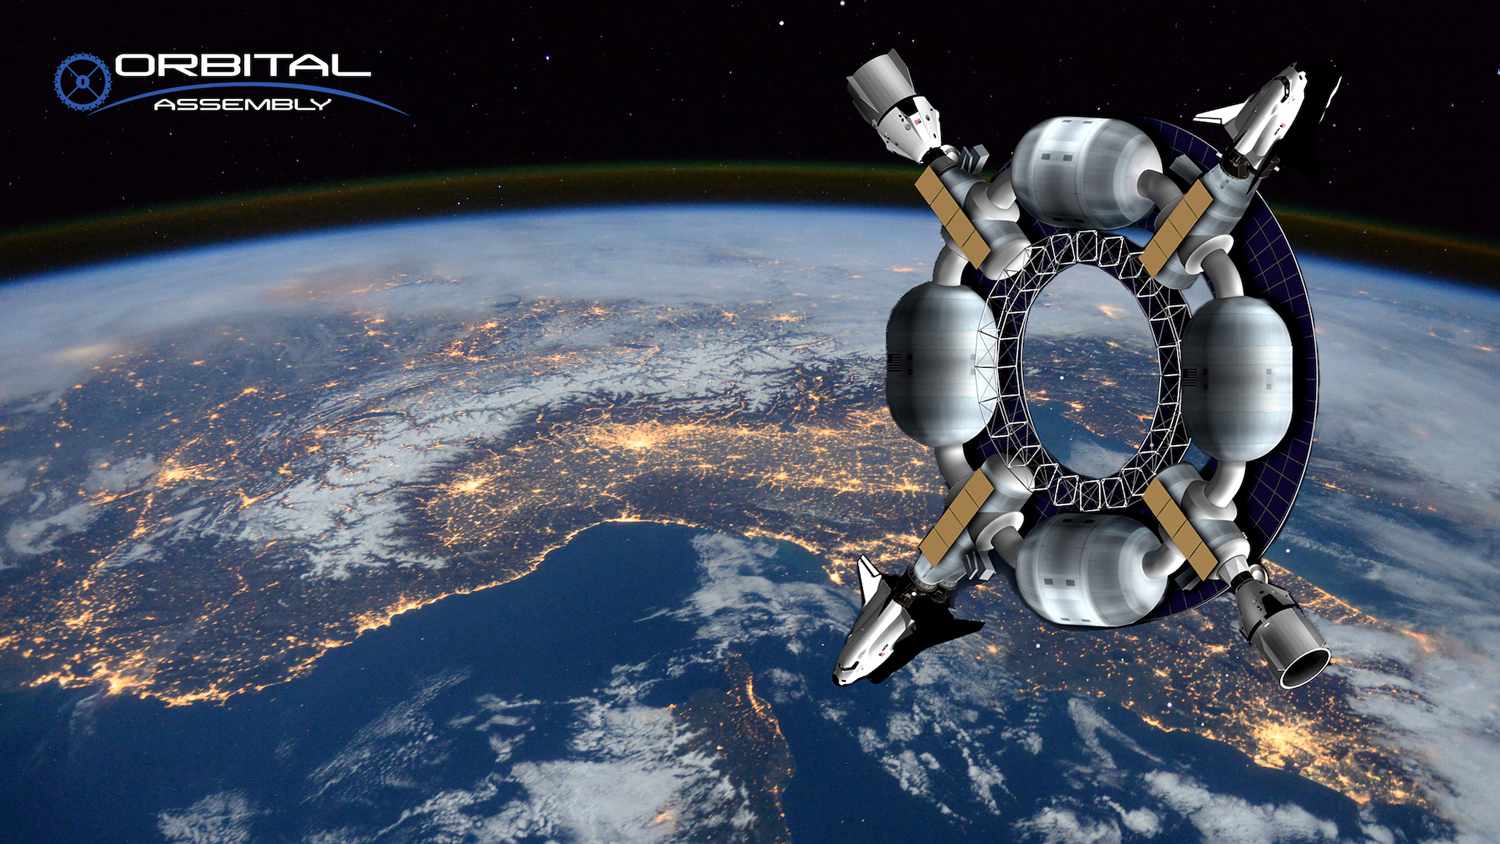 The World’s First Space Hotel Is Set to Open in 2025, Promises ‘a Sci-fi Dream Experience’ Image?url=https%3A%2F%2Fstatic.onecms.io%2Fwp-content%2Fuploads%2Fsites%2F20%2F2022%2F05%2F03%2Fspace-hotel-4